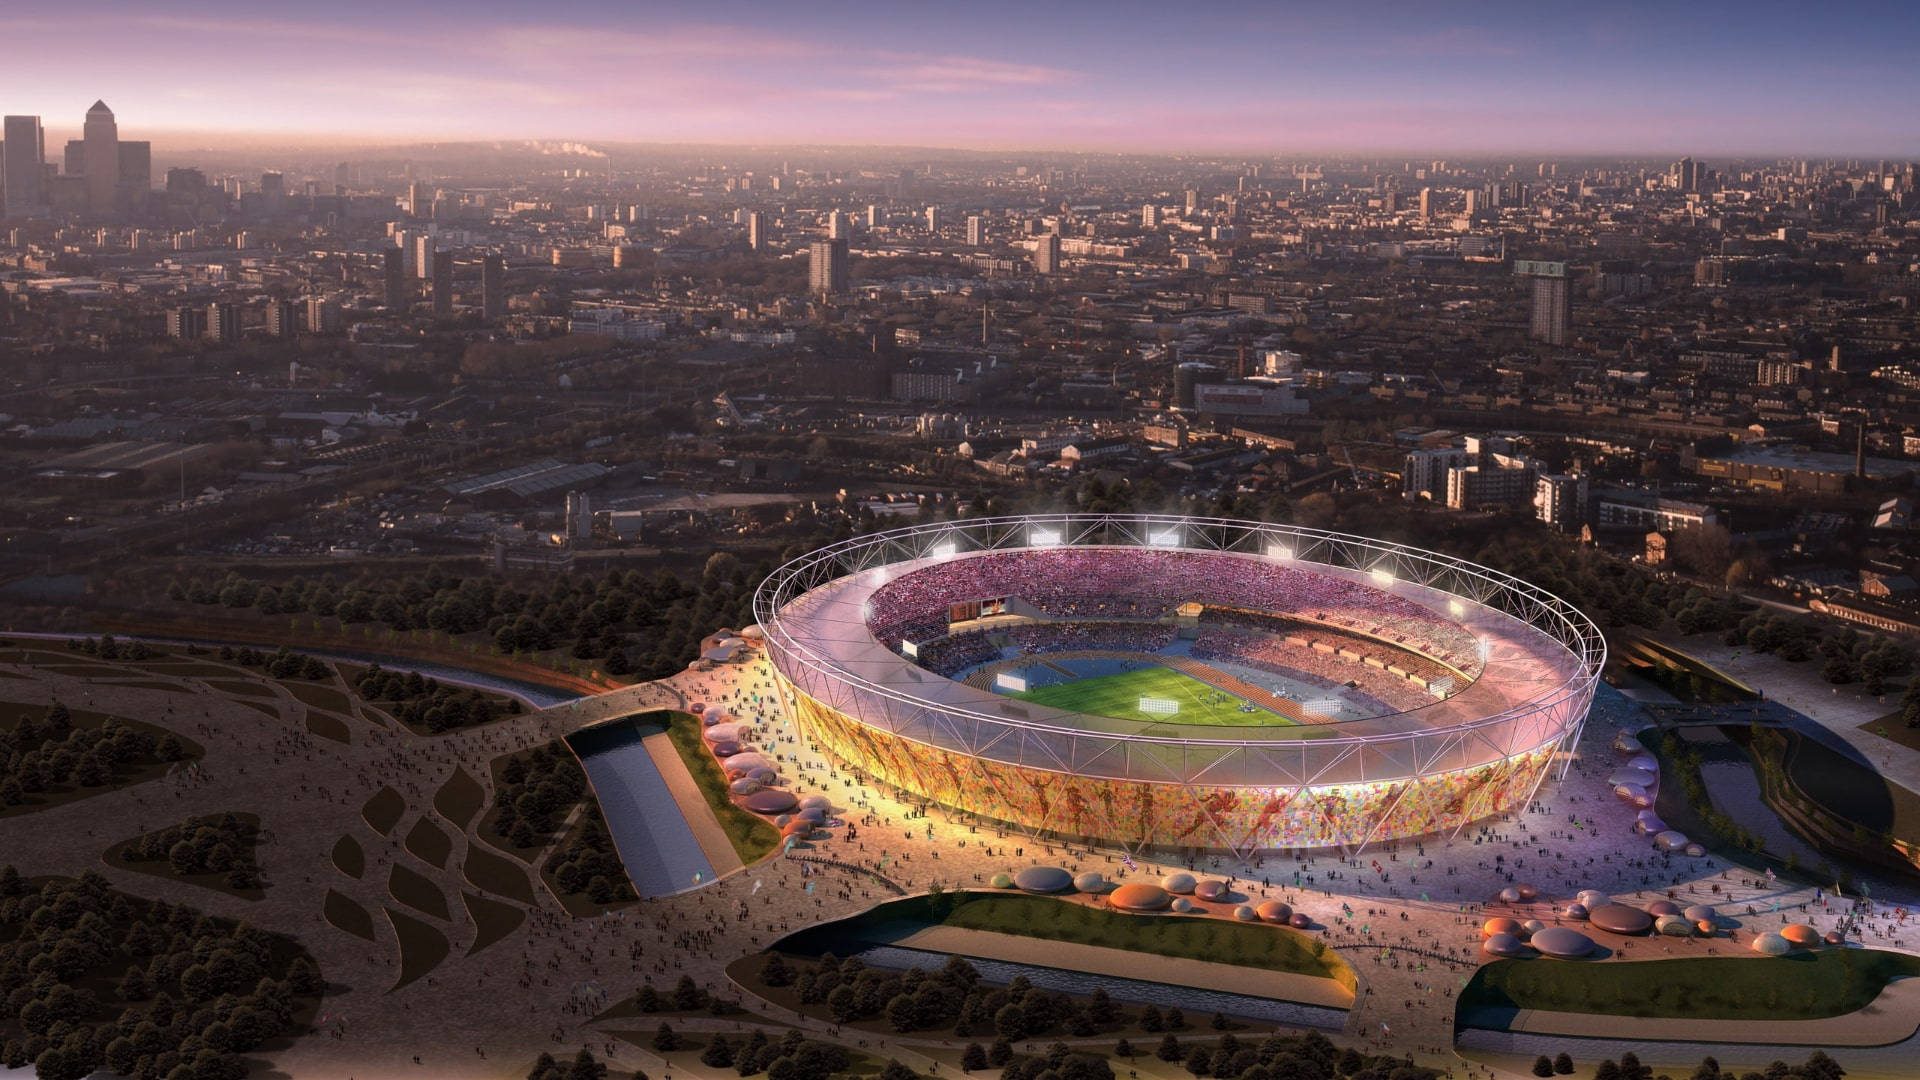 A Spectacular Sunset Visible Through The Stadium Of The Olympics